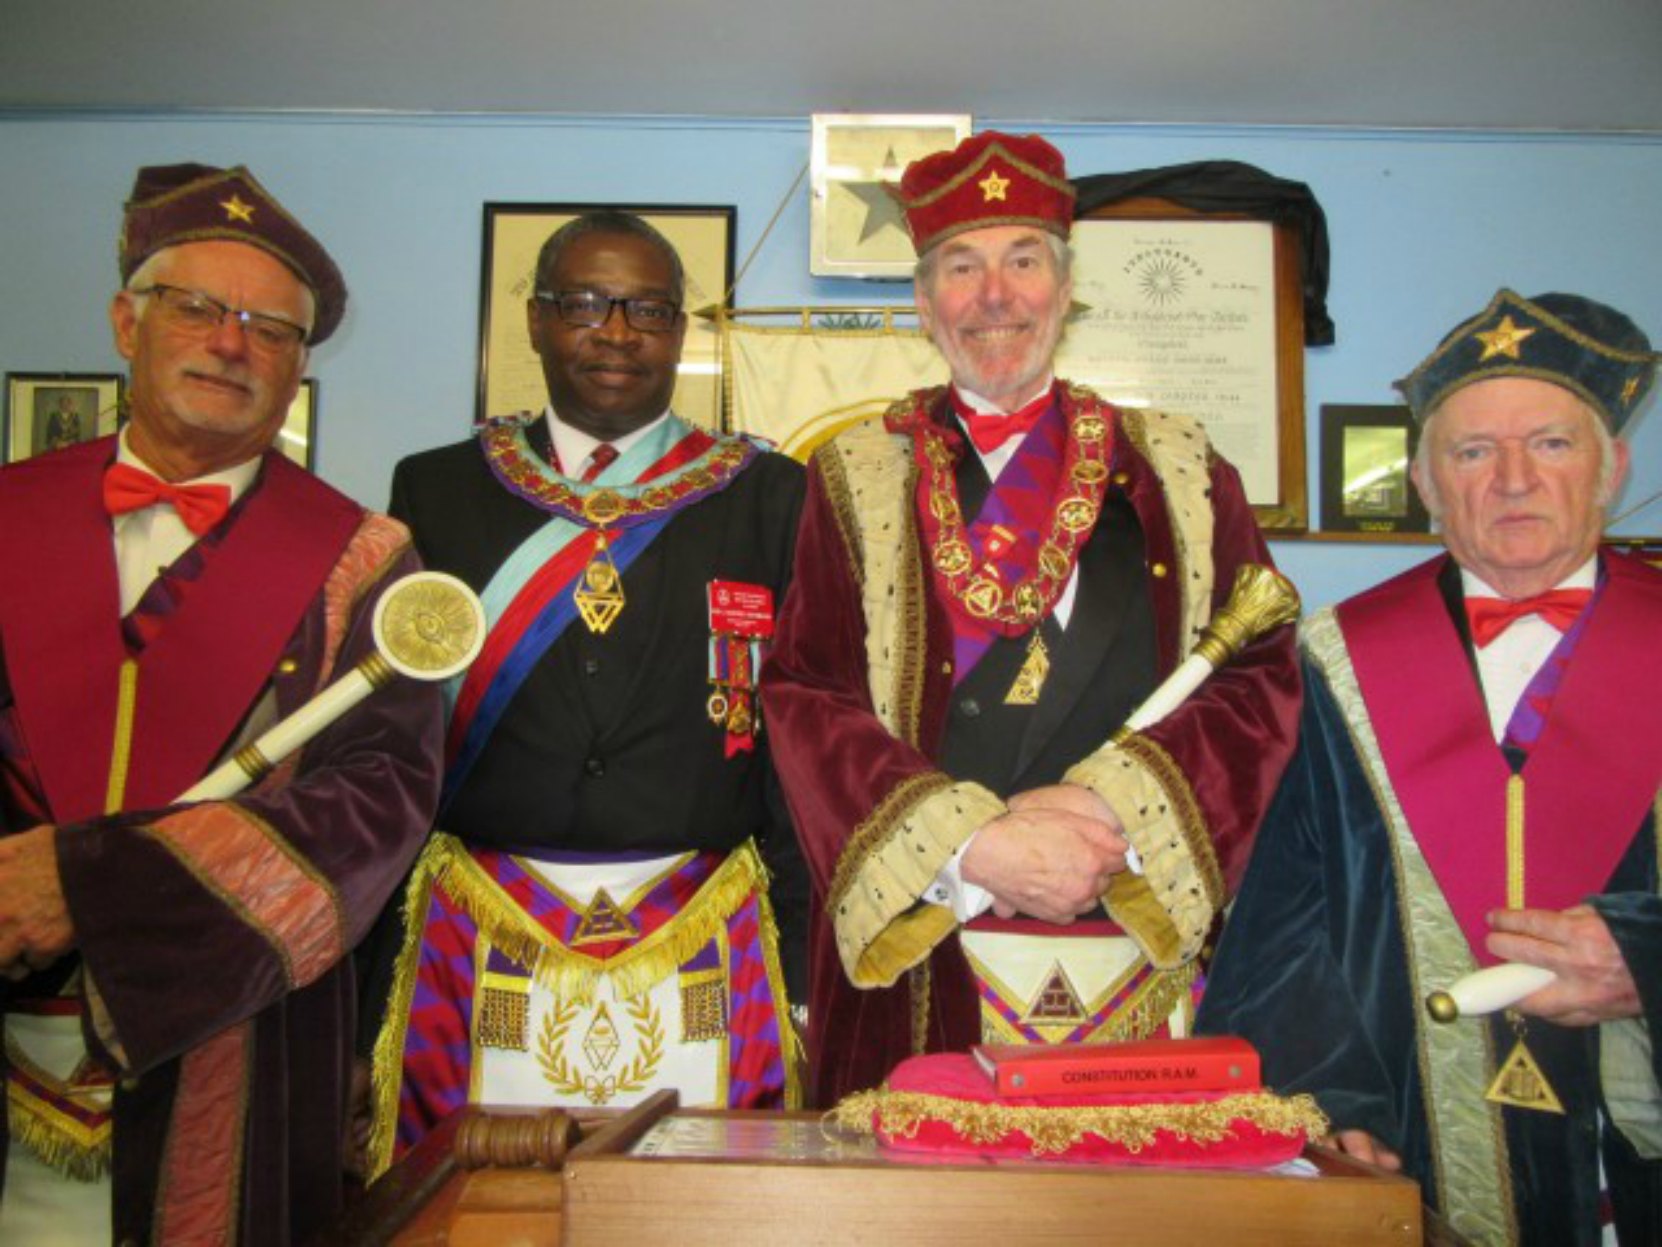 Tzouhalem Chapter's Principals for 2017 with the Grand Principal. EC Rick Mellson (left), MEC Godfrey Onymaobi (Grand First Principal), EC Paul Philcox (second from right), EC Bob Crawford (right) at the Joint Installation held in Sooke on 17 November 2016